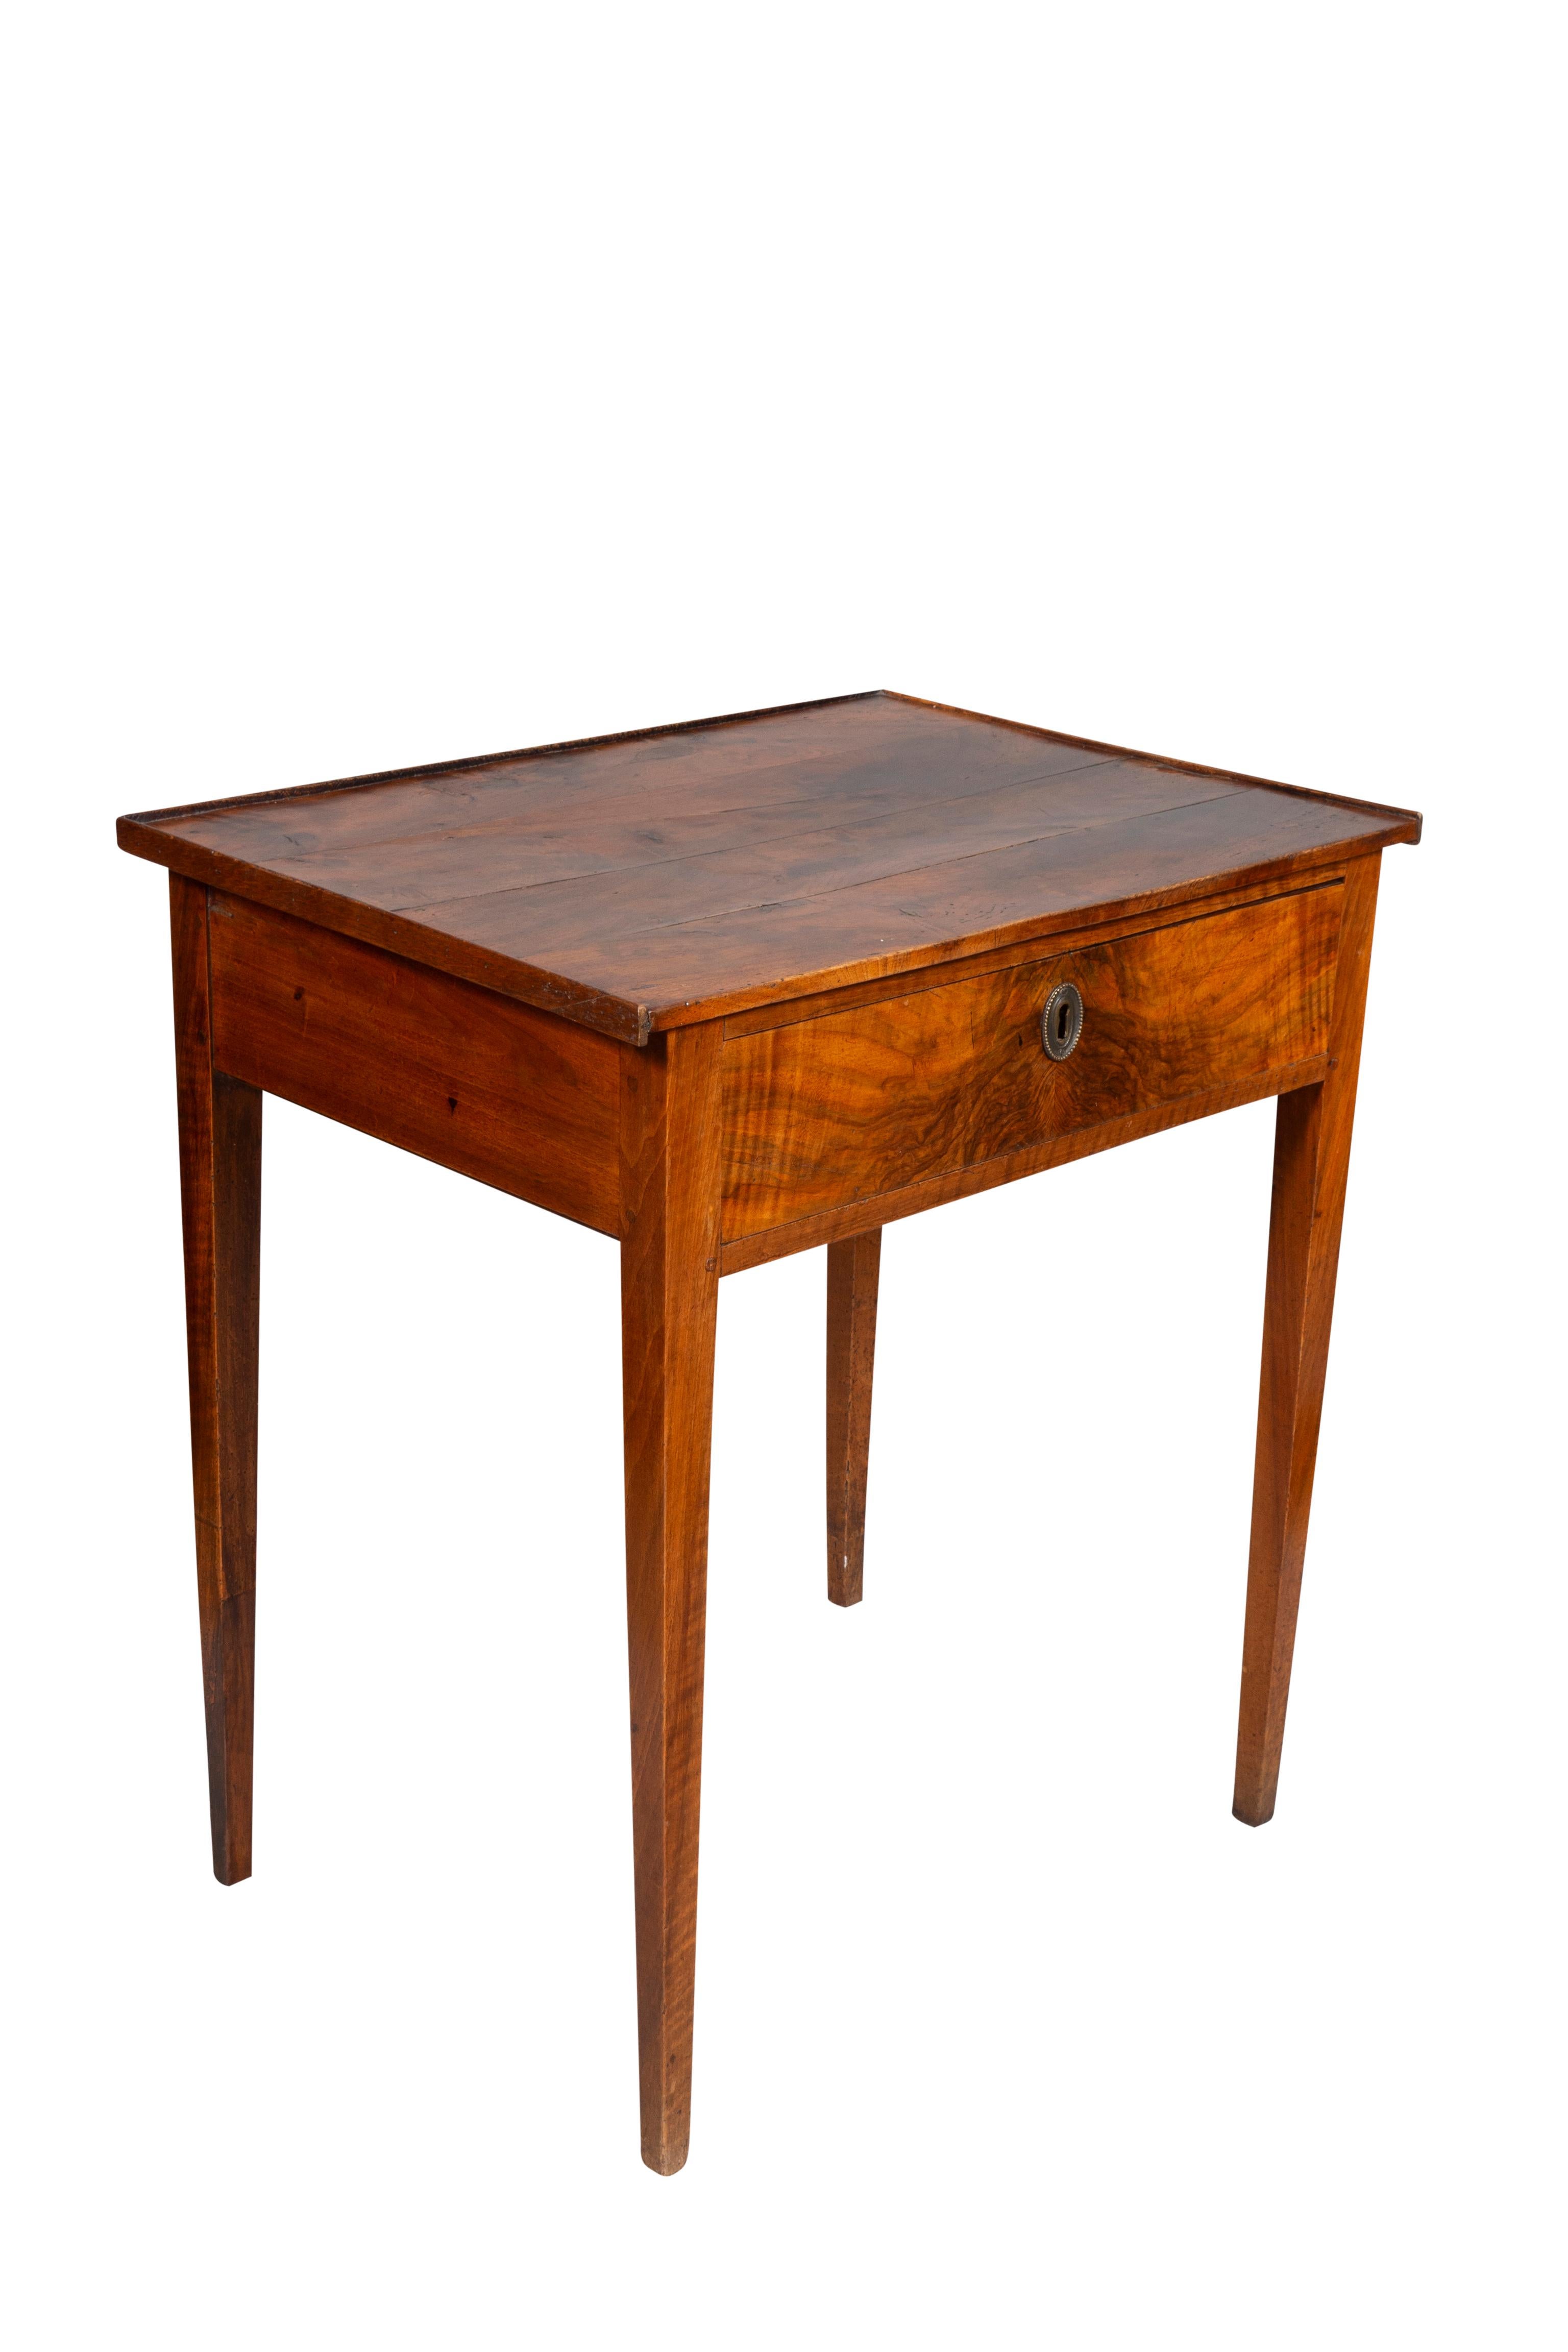 French Directoire Provincial Walnut Table For Sale